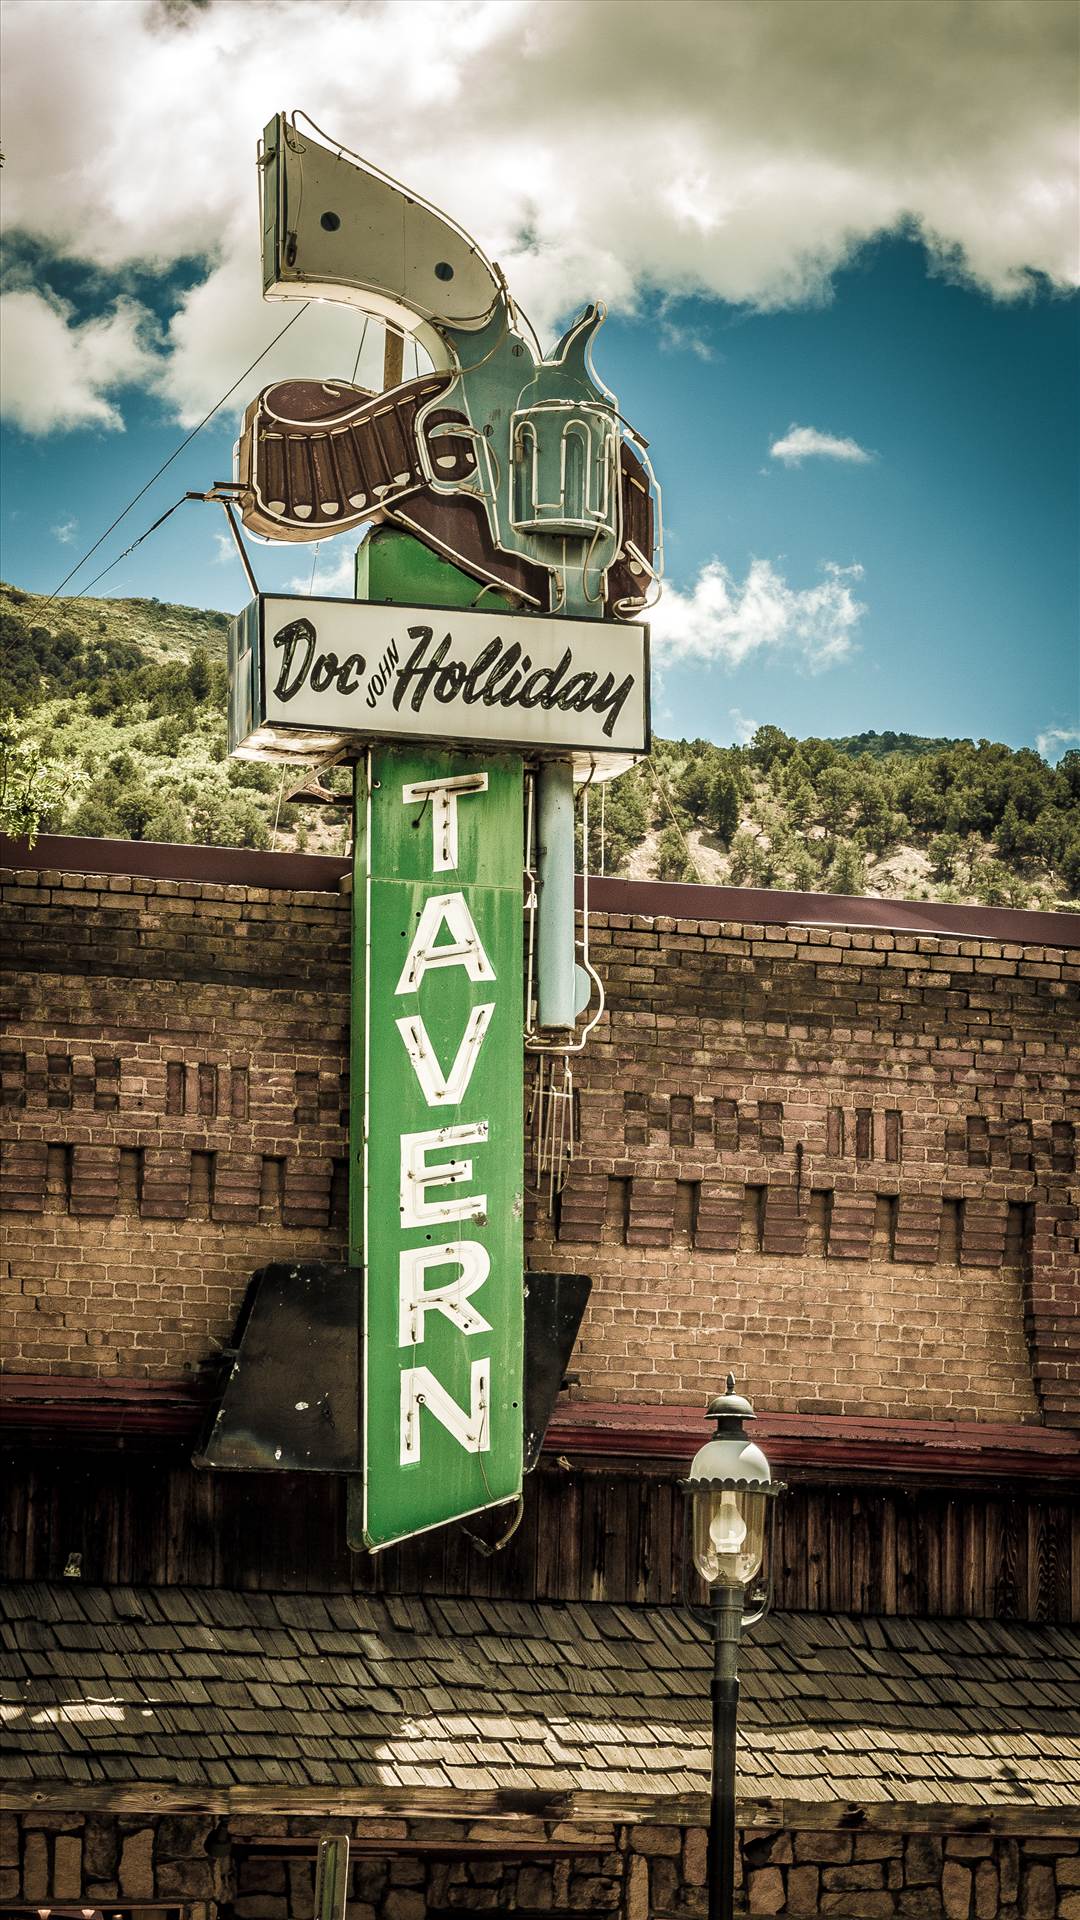 Doc Holliday Tavern in Glenwood Springs The famous sign for the Doc Holliday Tavern in Glenwood Springs by Scott Smith Photos